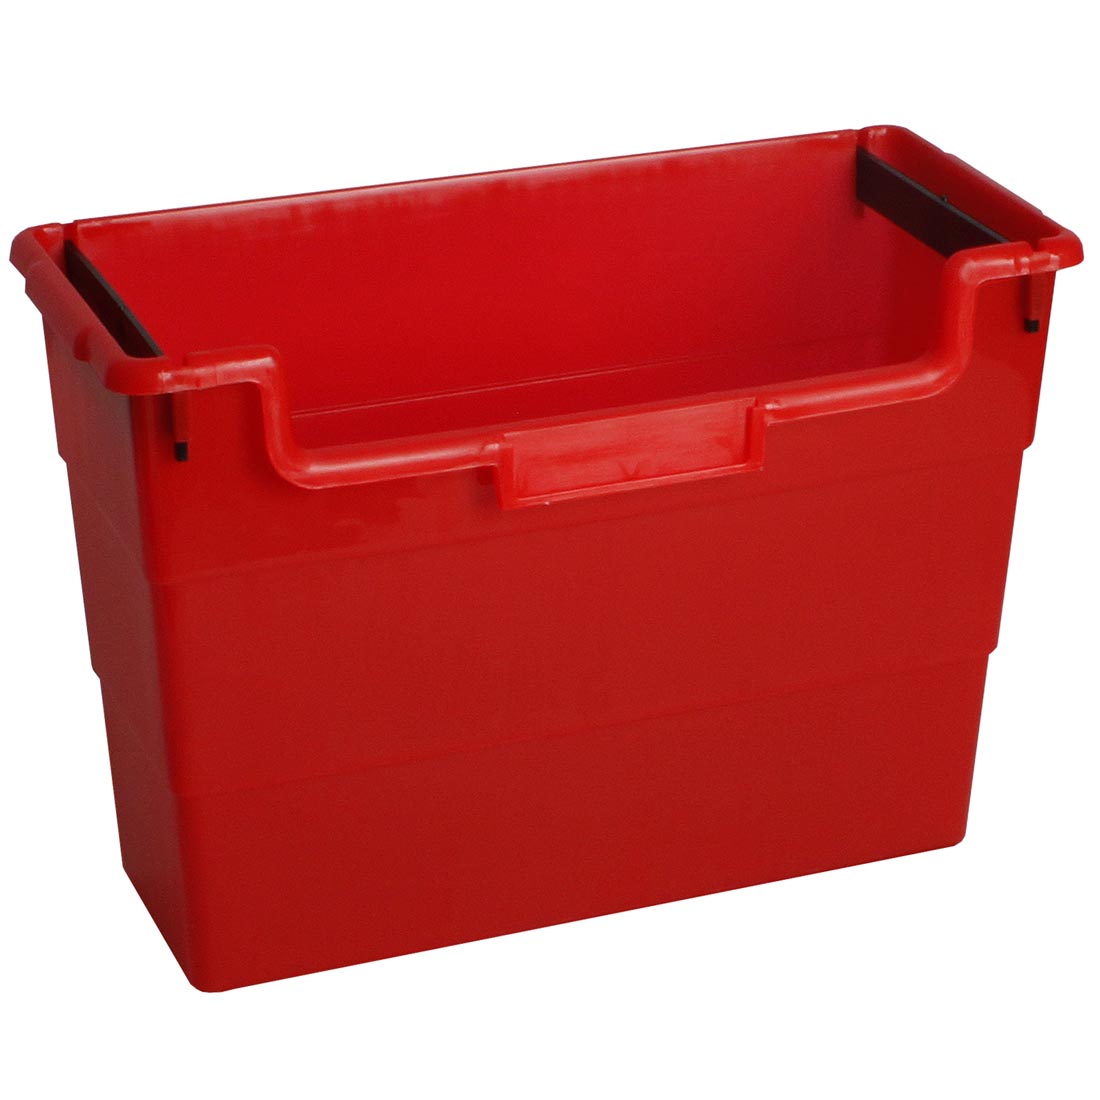 Romanoff Products Red Desk Top Organizer